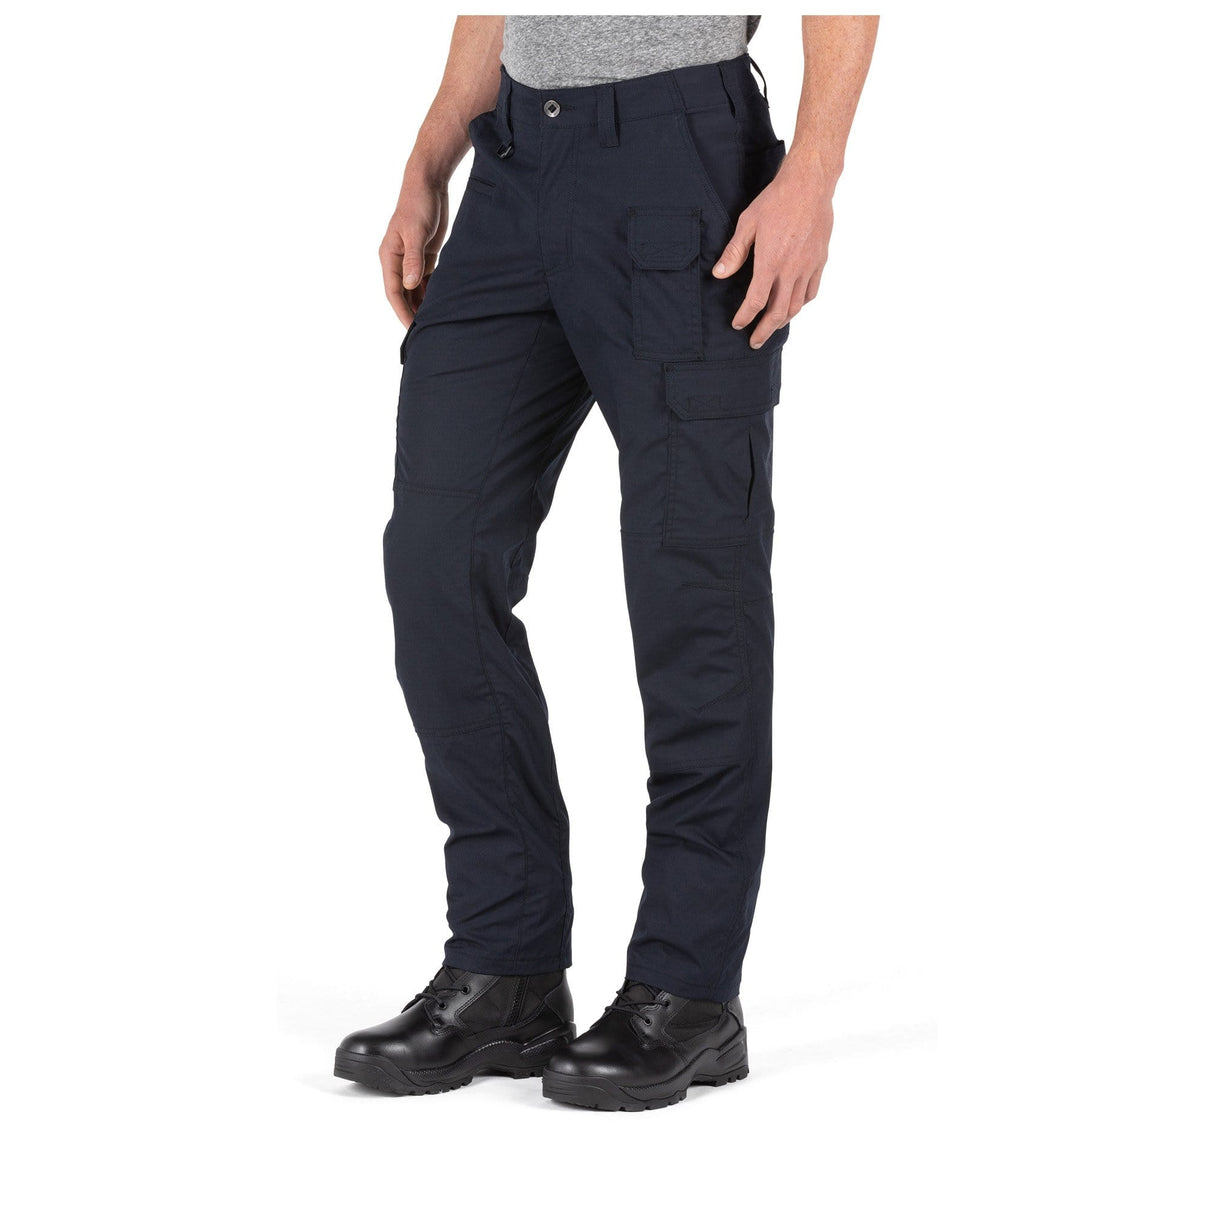 ABR PRO PANT DARK NAVY - 5.11 Tactical Finland Store